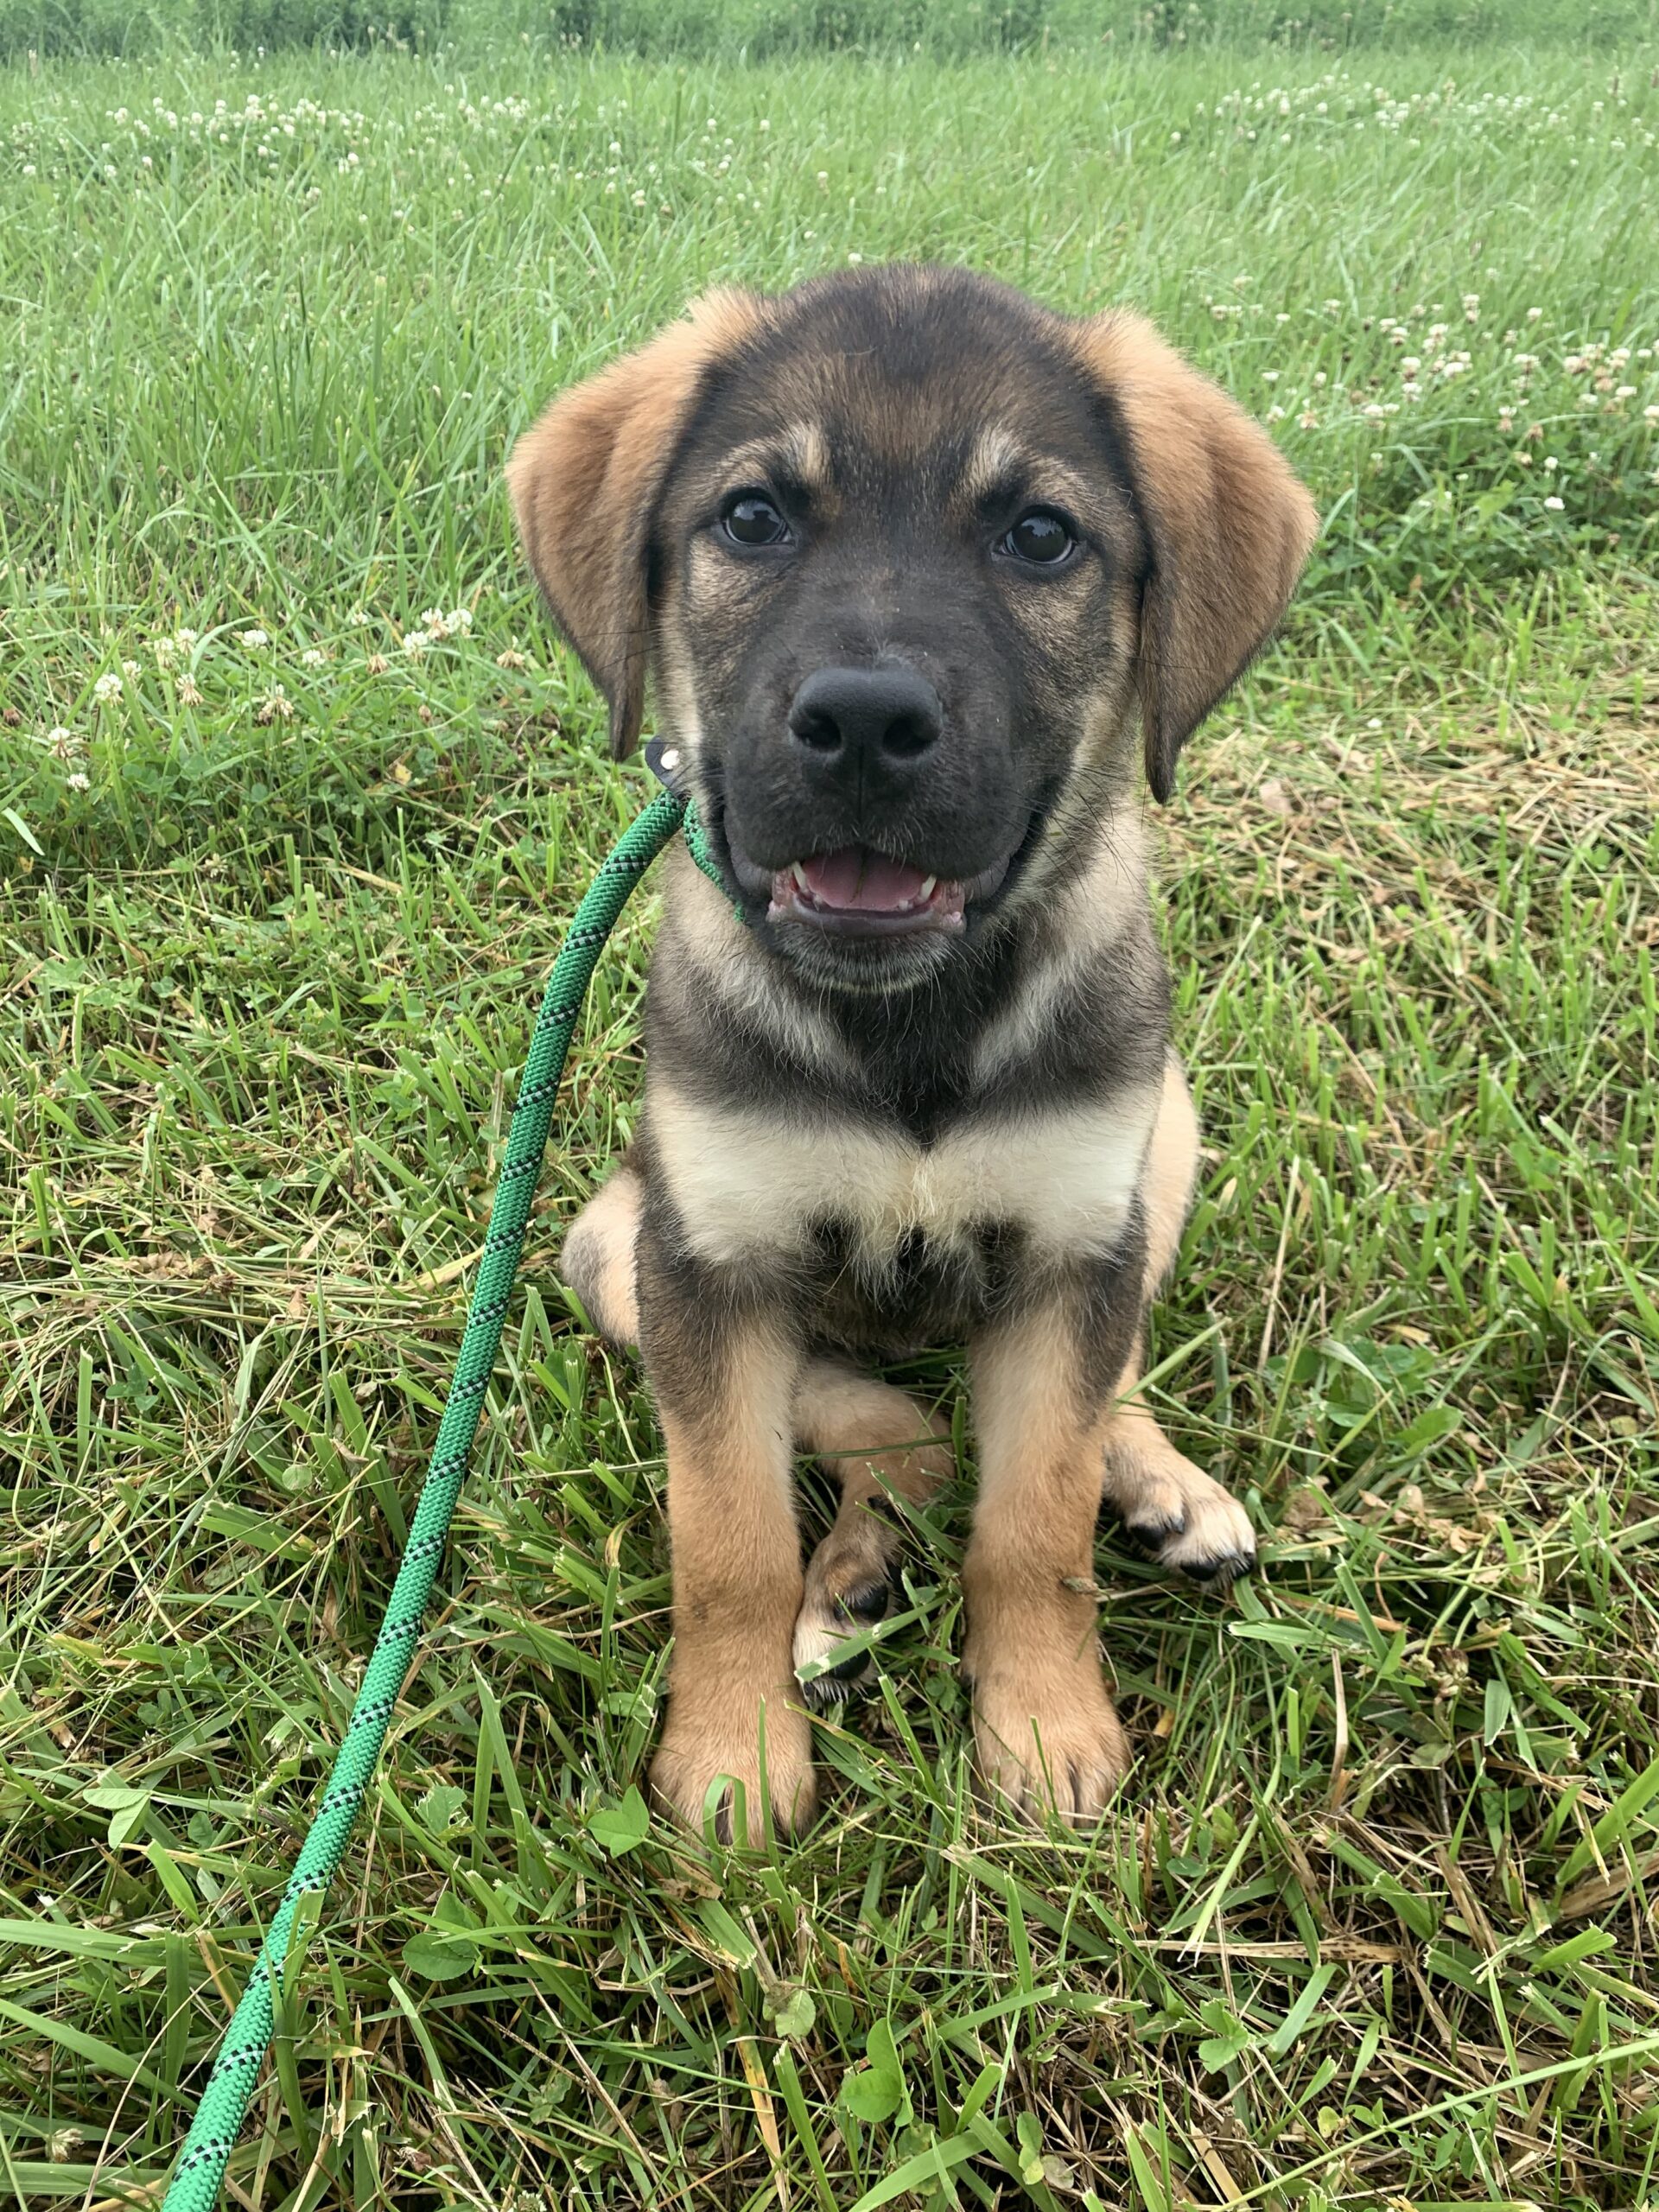 theo service dog in training